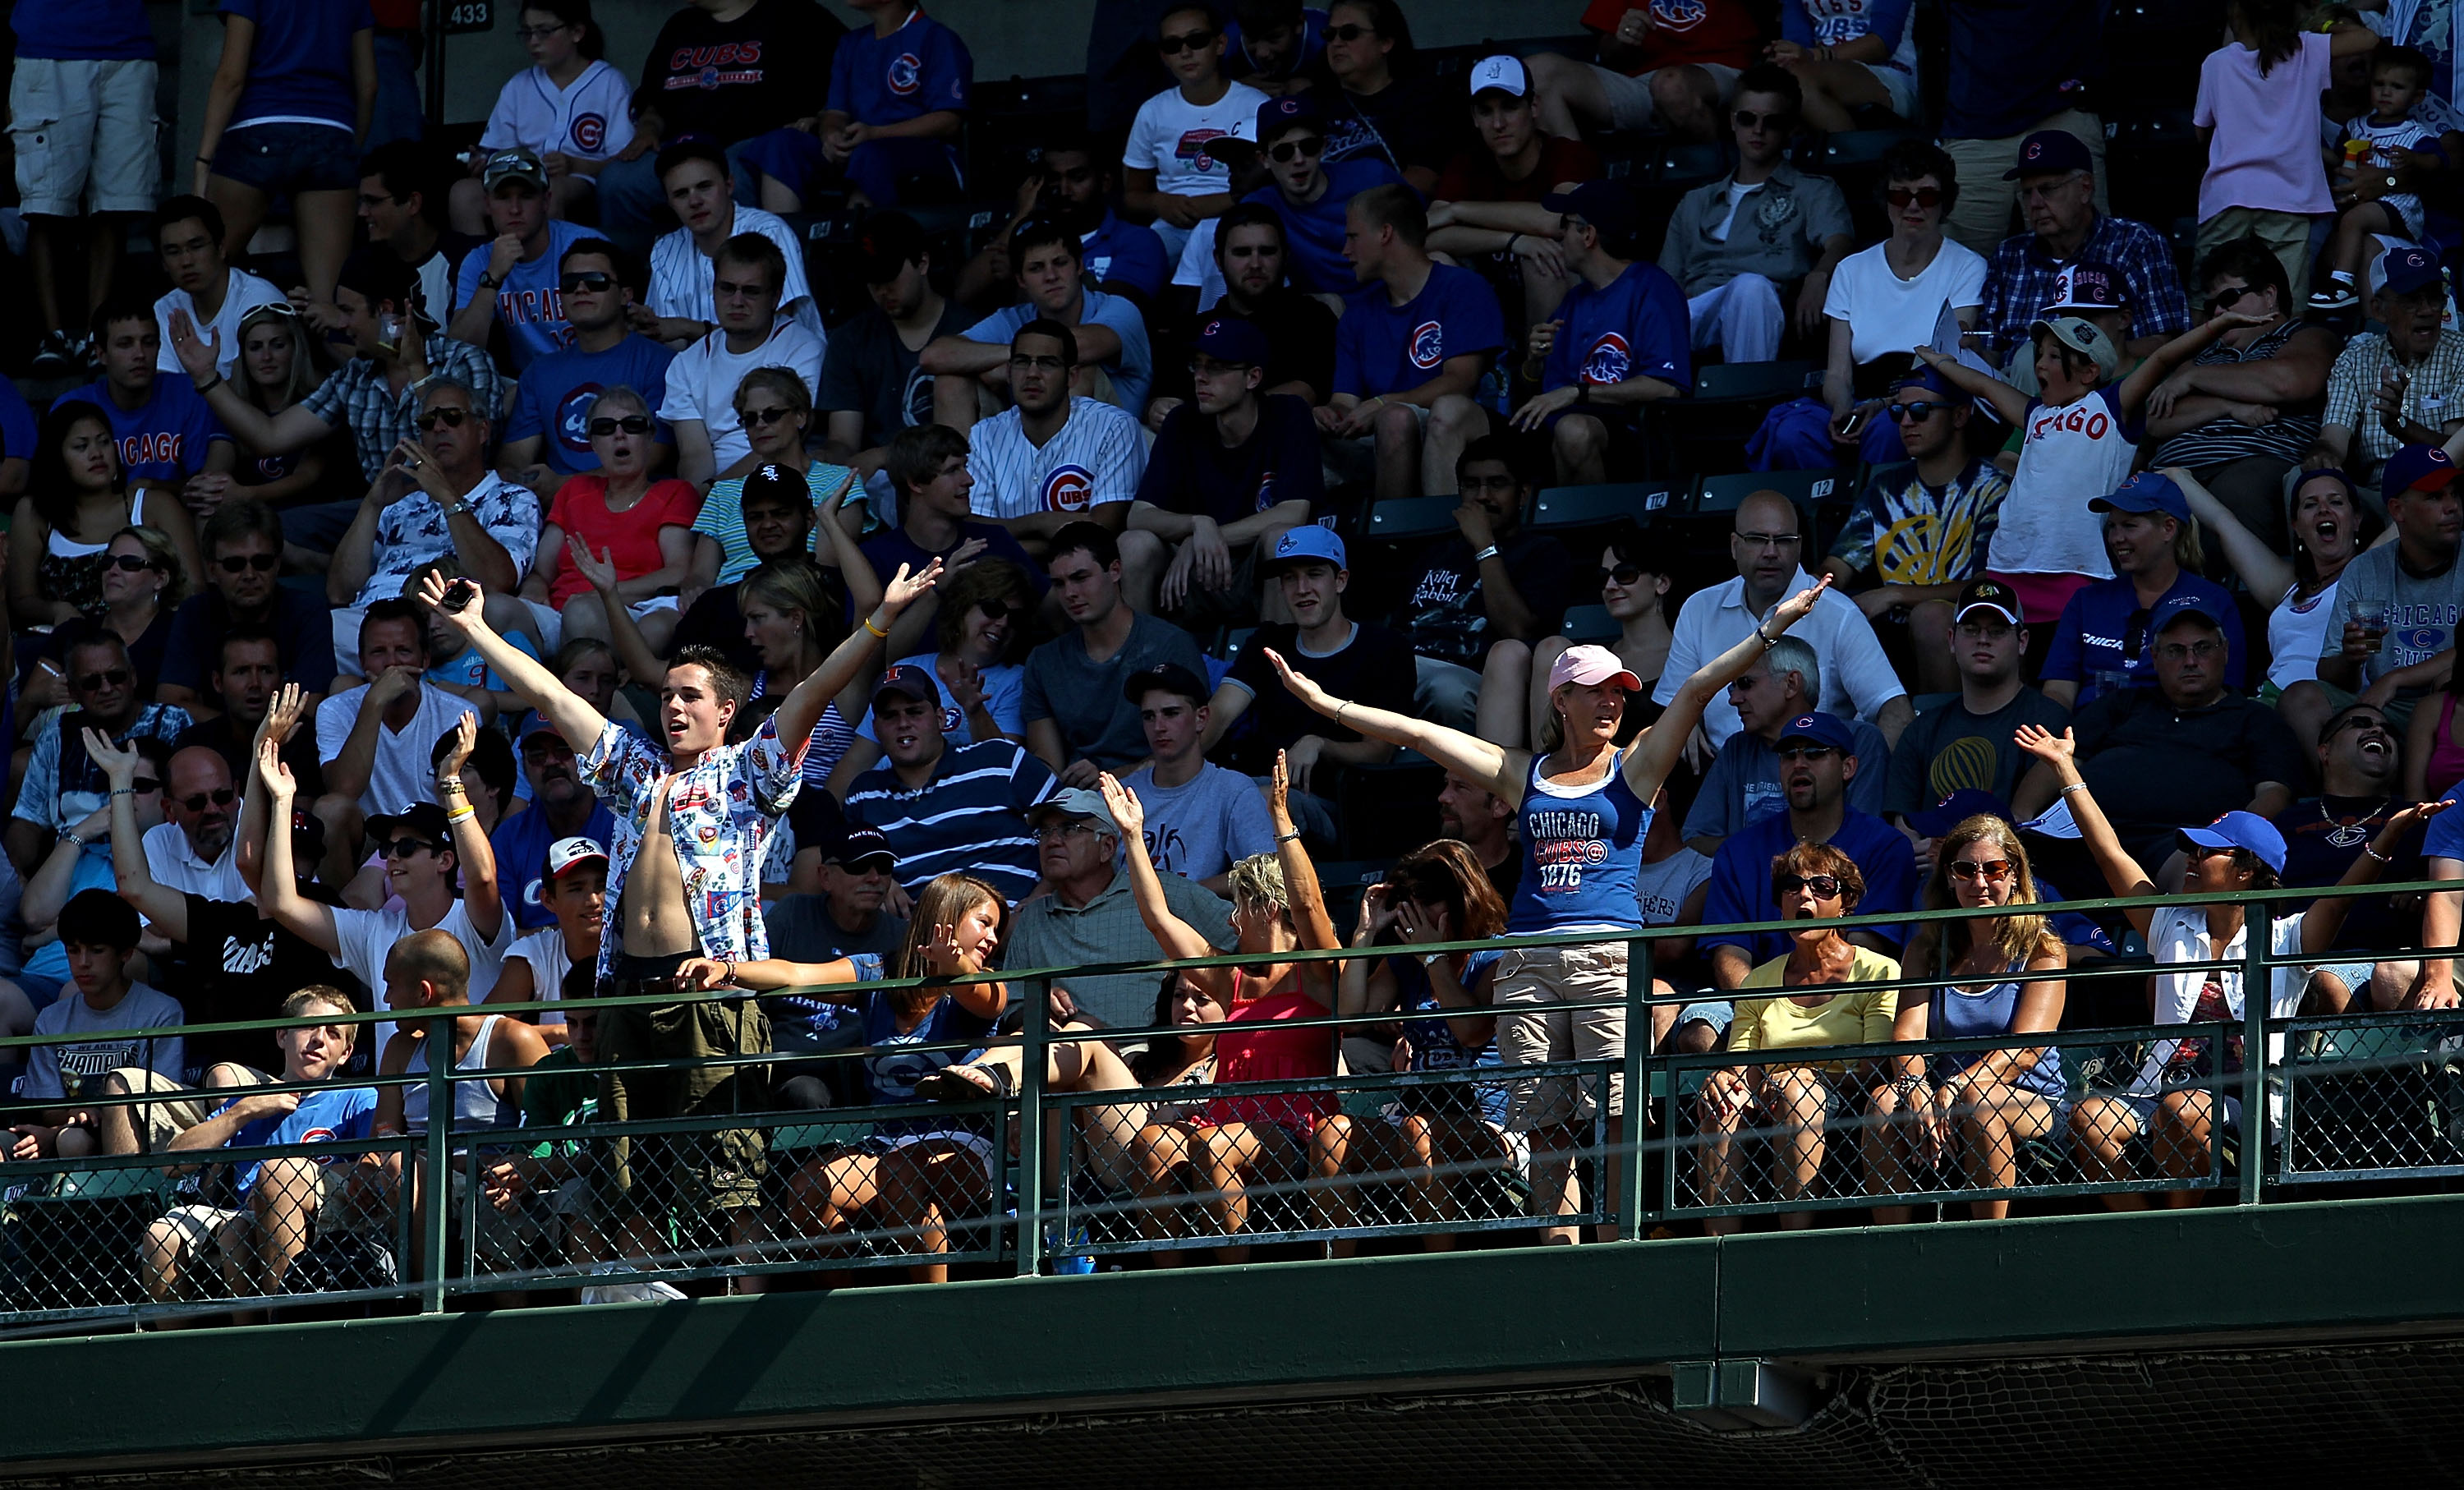 CHICAGO - JULY 21: Fans in the upper deck do a dance to the song 'YMCA' during a pitching change as the Chicago Cubs take on the Houston Astros at Wrigley Field on July 21, 2010 in Chicago, Illinois. The Astros defeated the Cubs 4-3 in 12 innings. (Photo